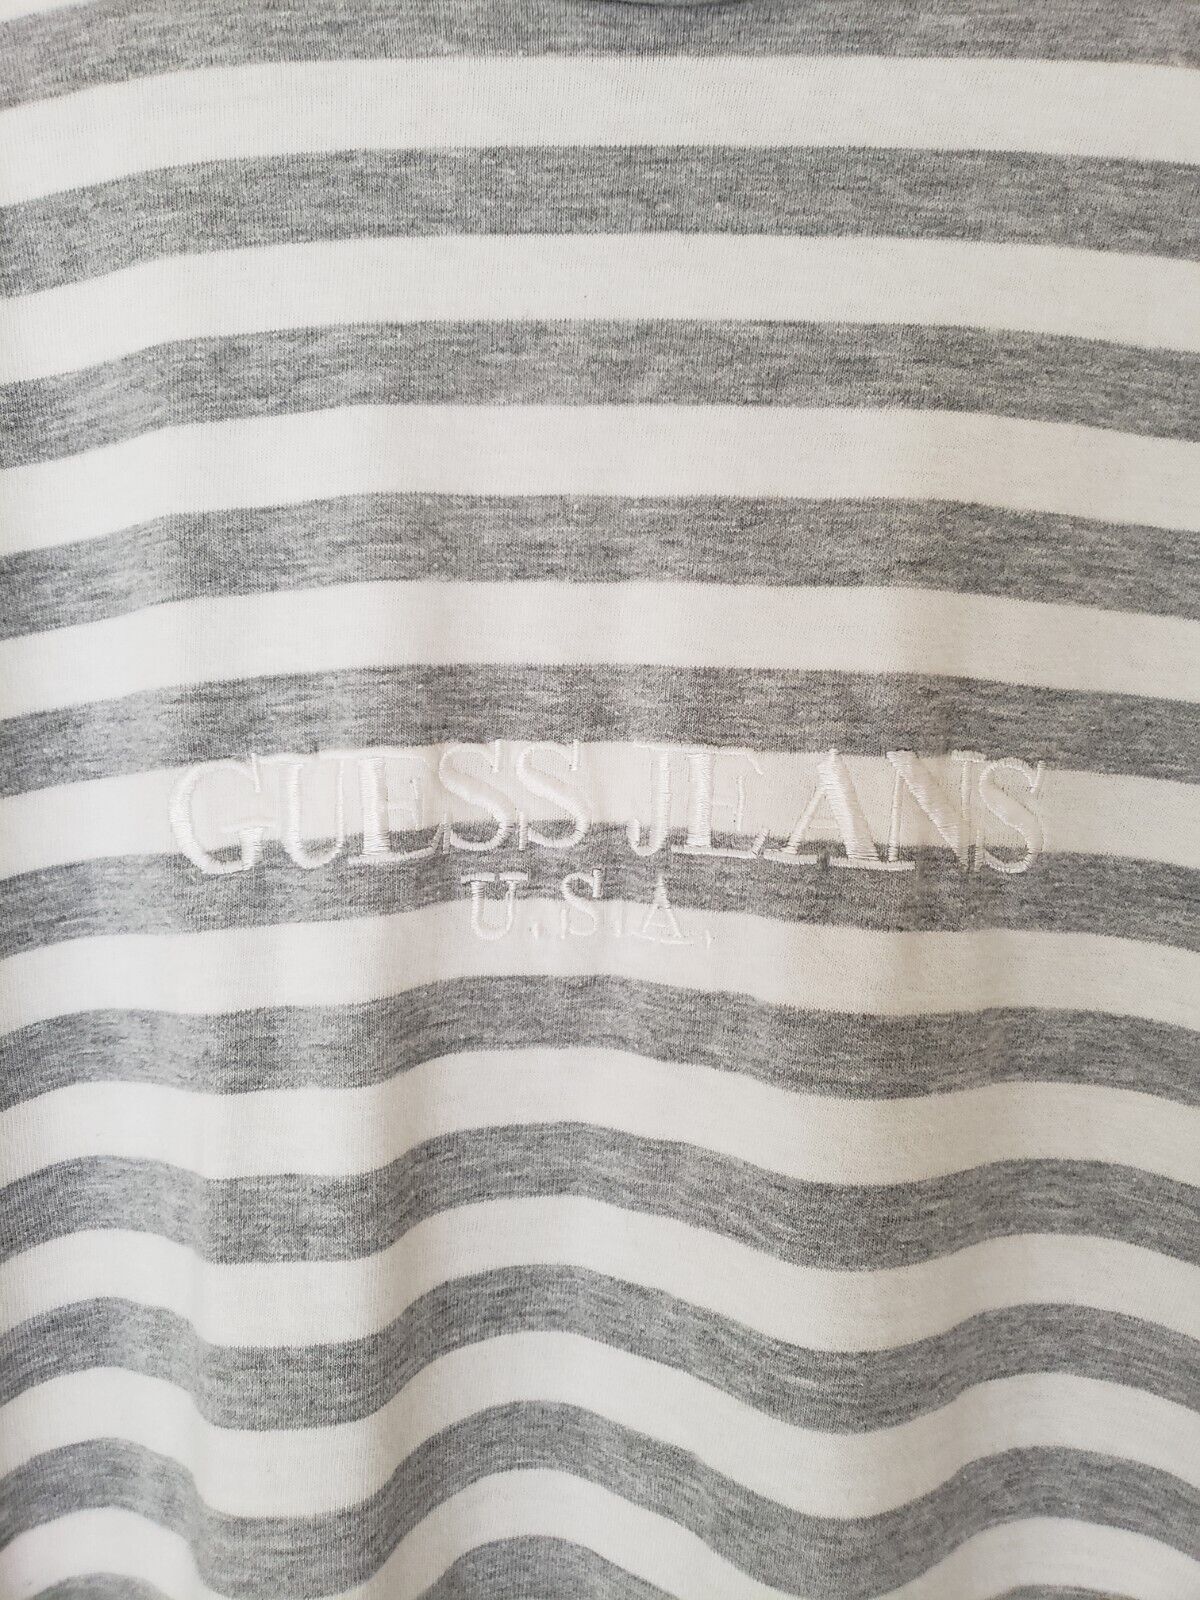 Vintage Guess Jeans Grey Striped Tee Made In USA - image 3